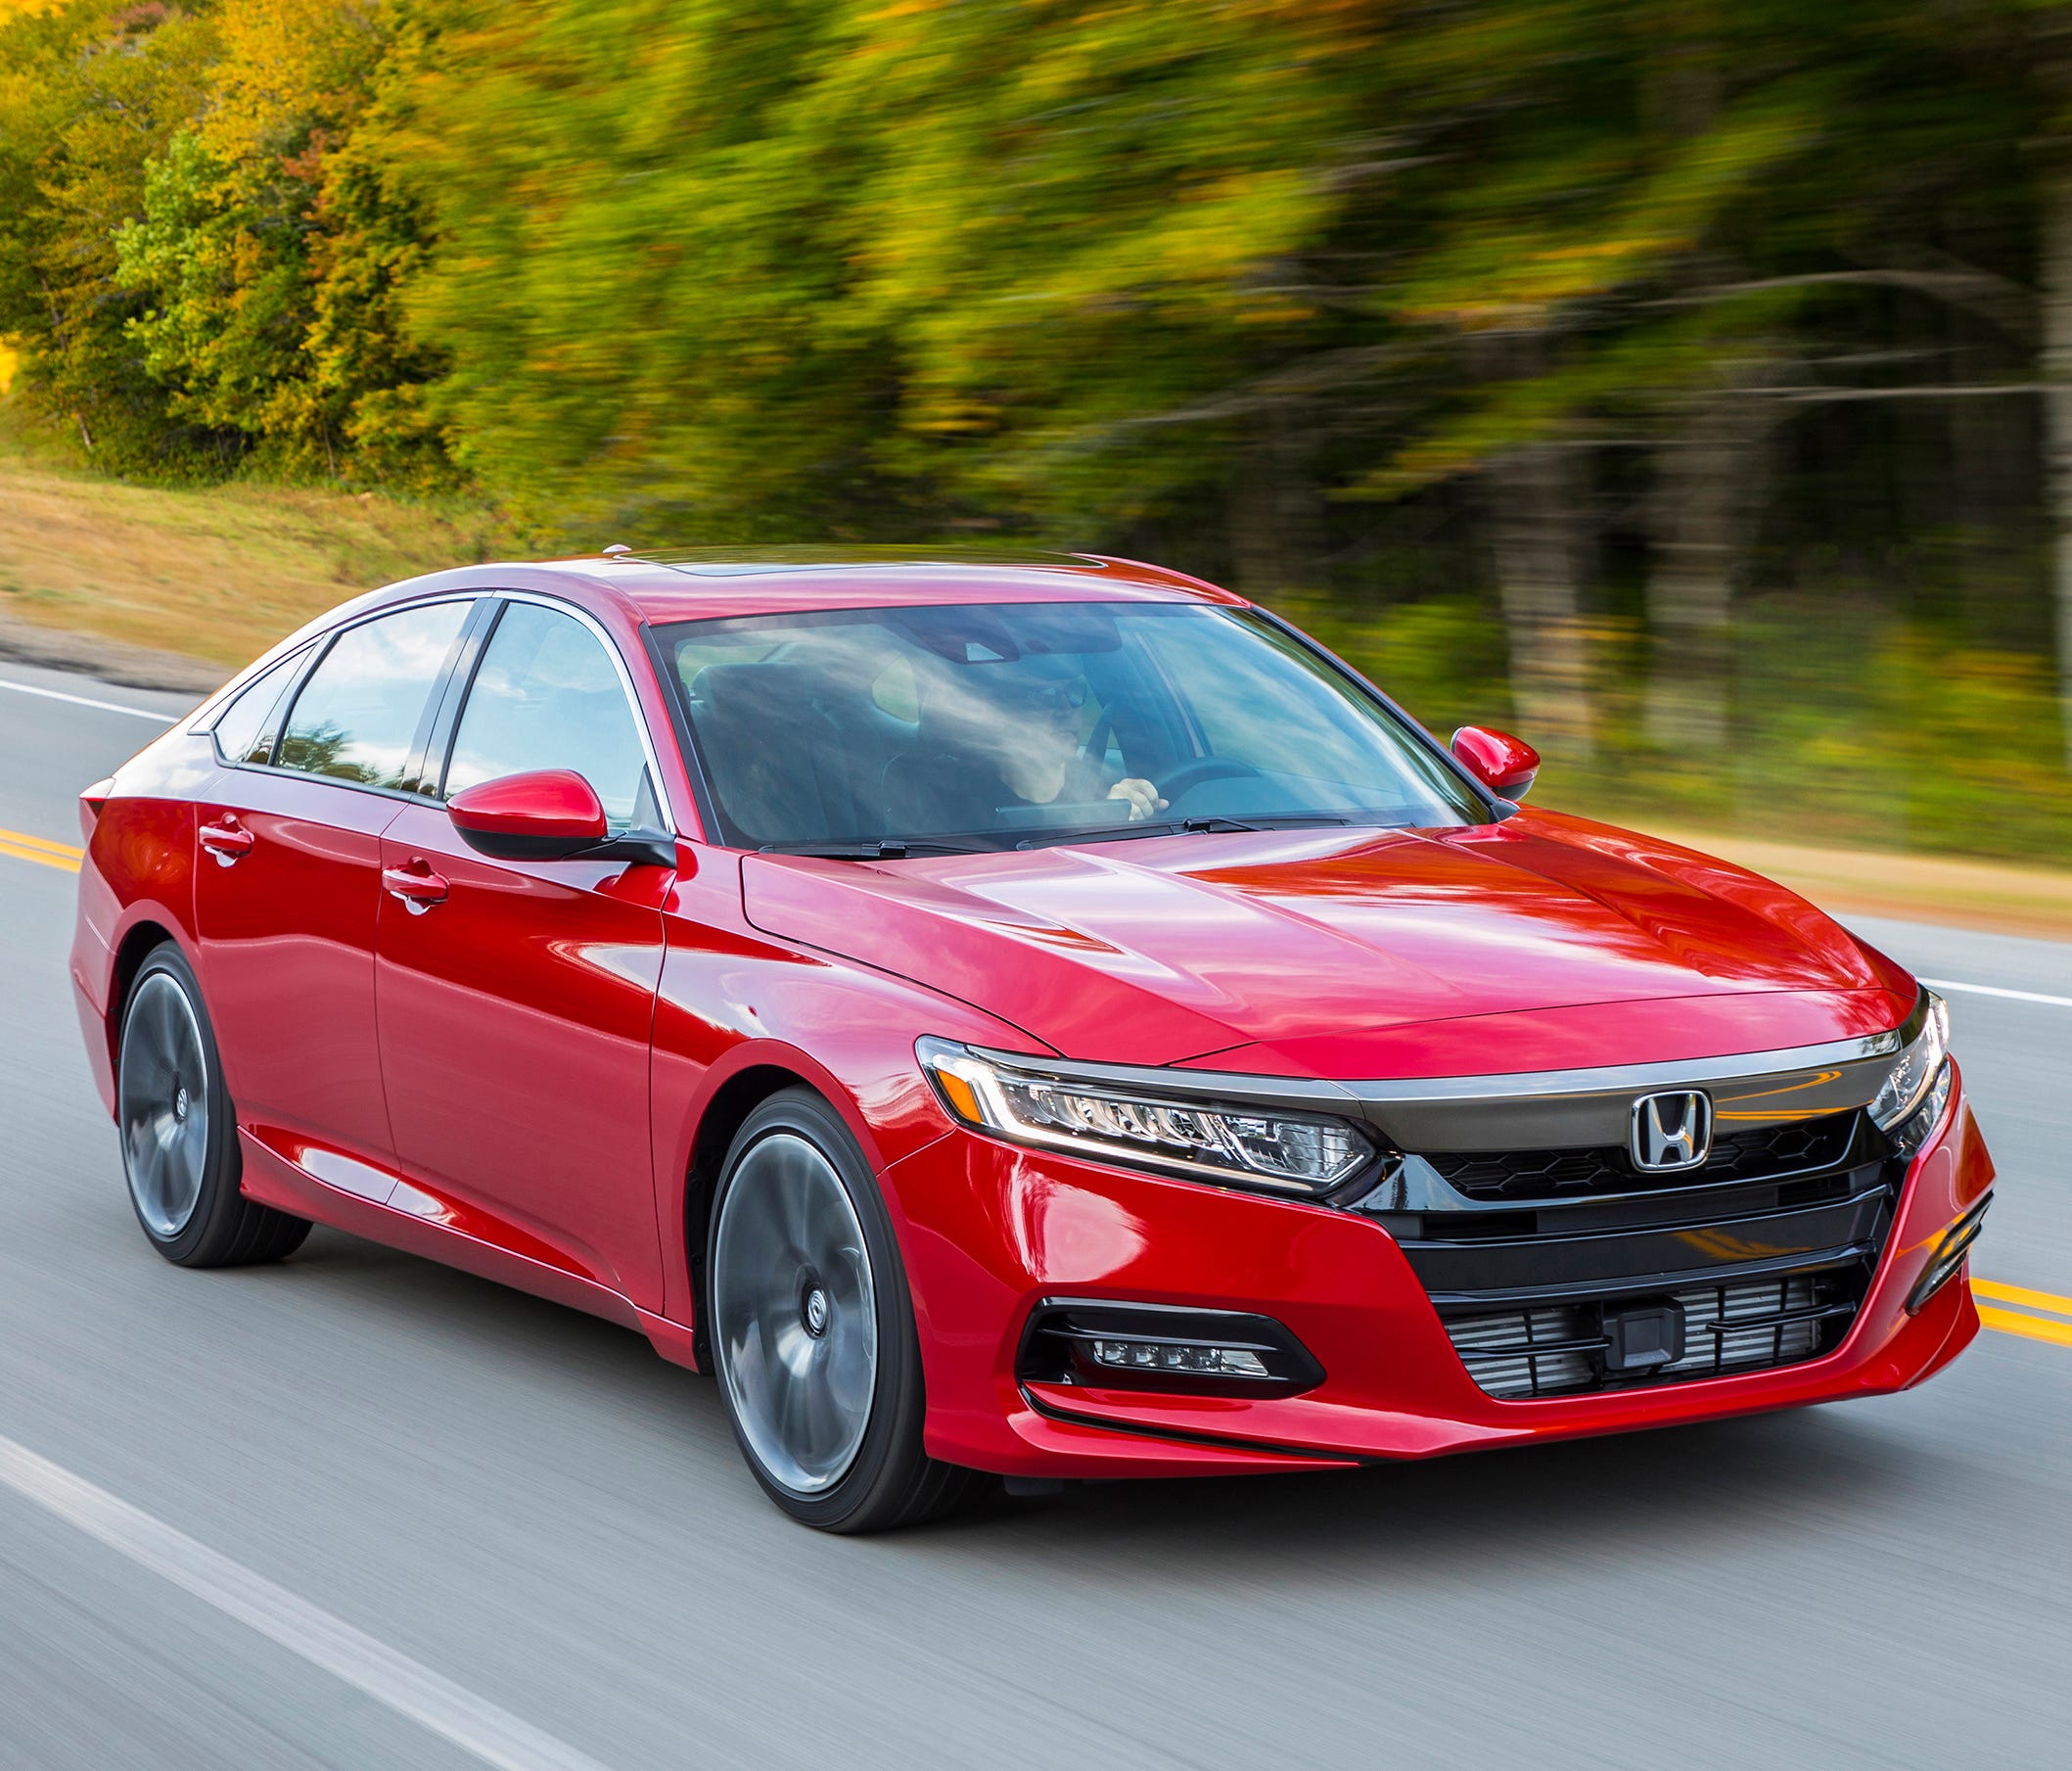 This photo provided by Honda shows the 2018 Honda Accord, a midsize sedan that's available with a manual transmission. The Accord makes an excellent family car, and the manual transmission provides an added level of driver engagement.